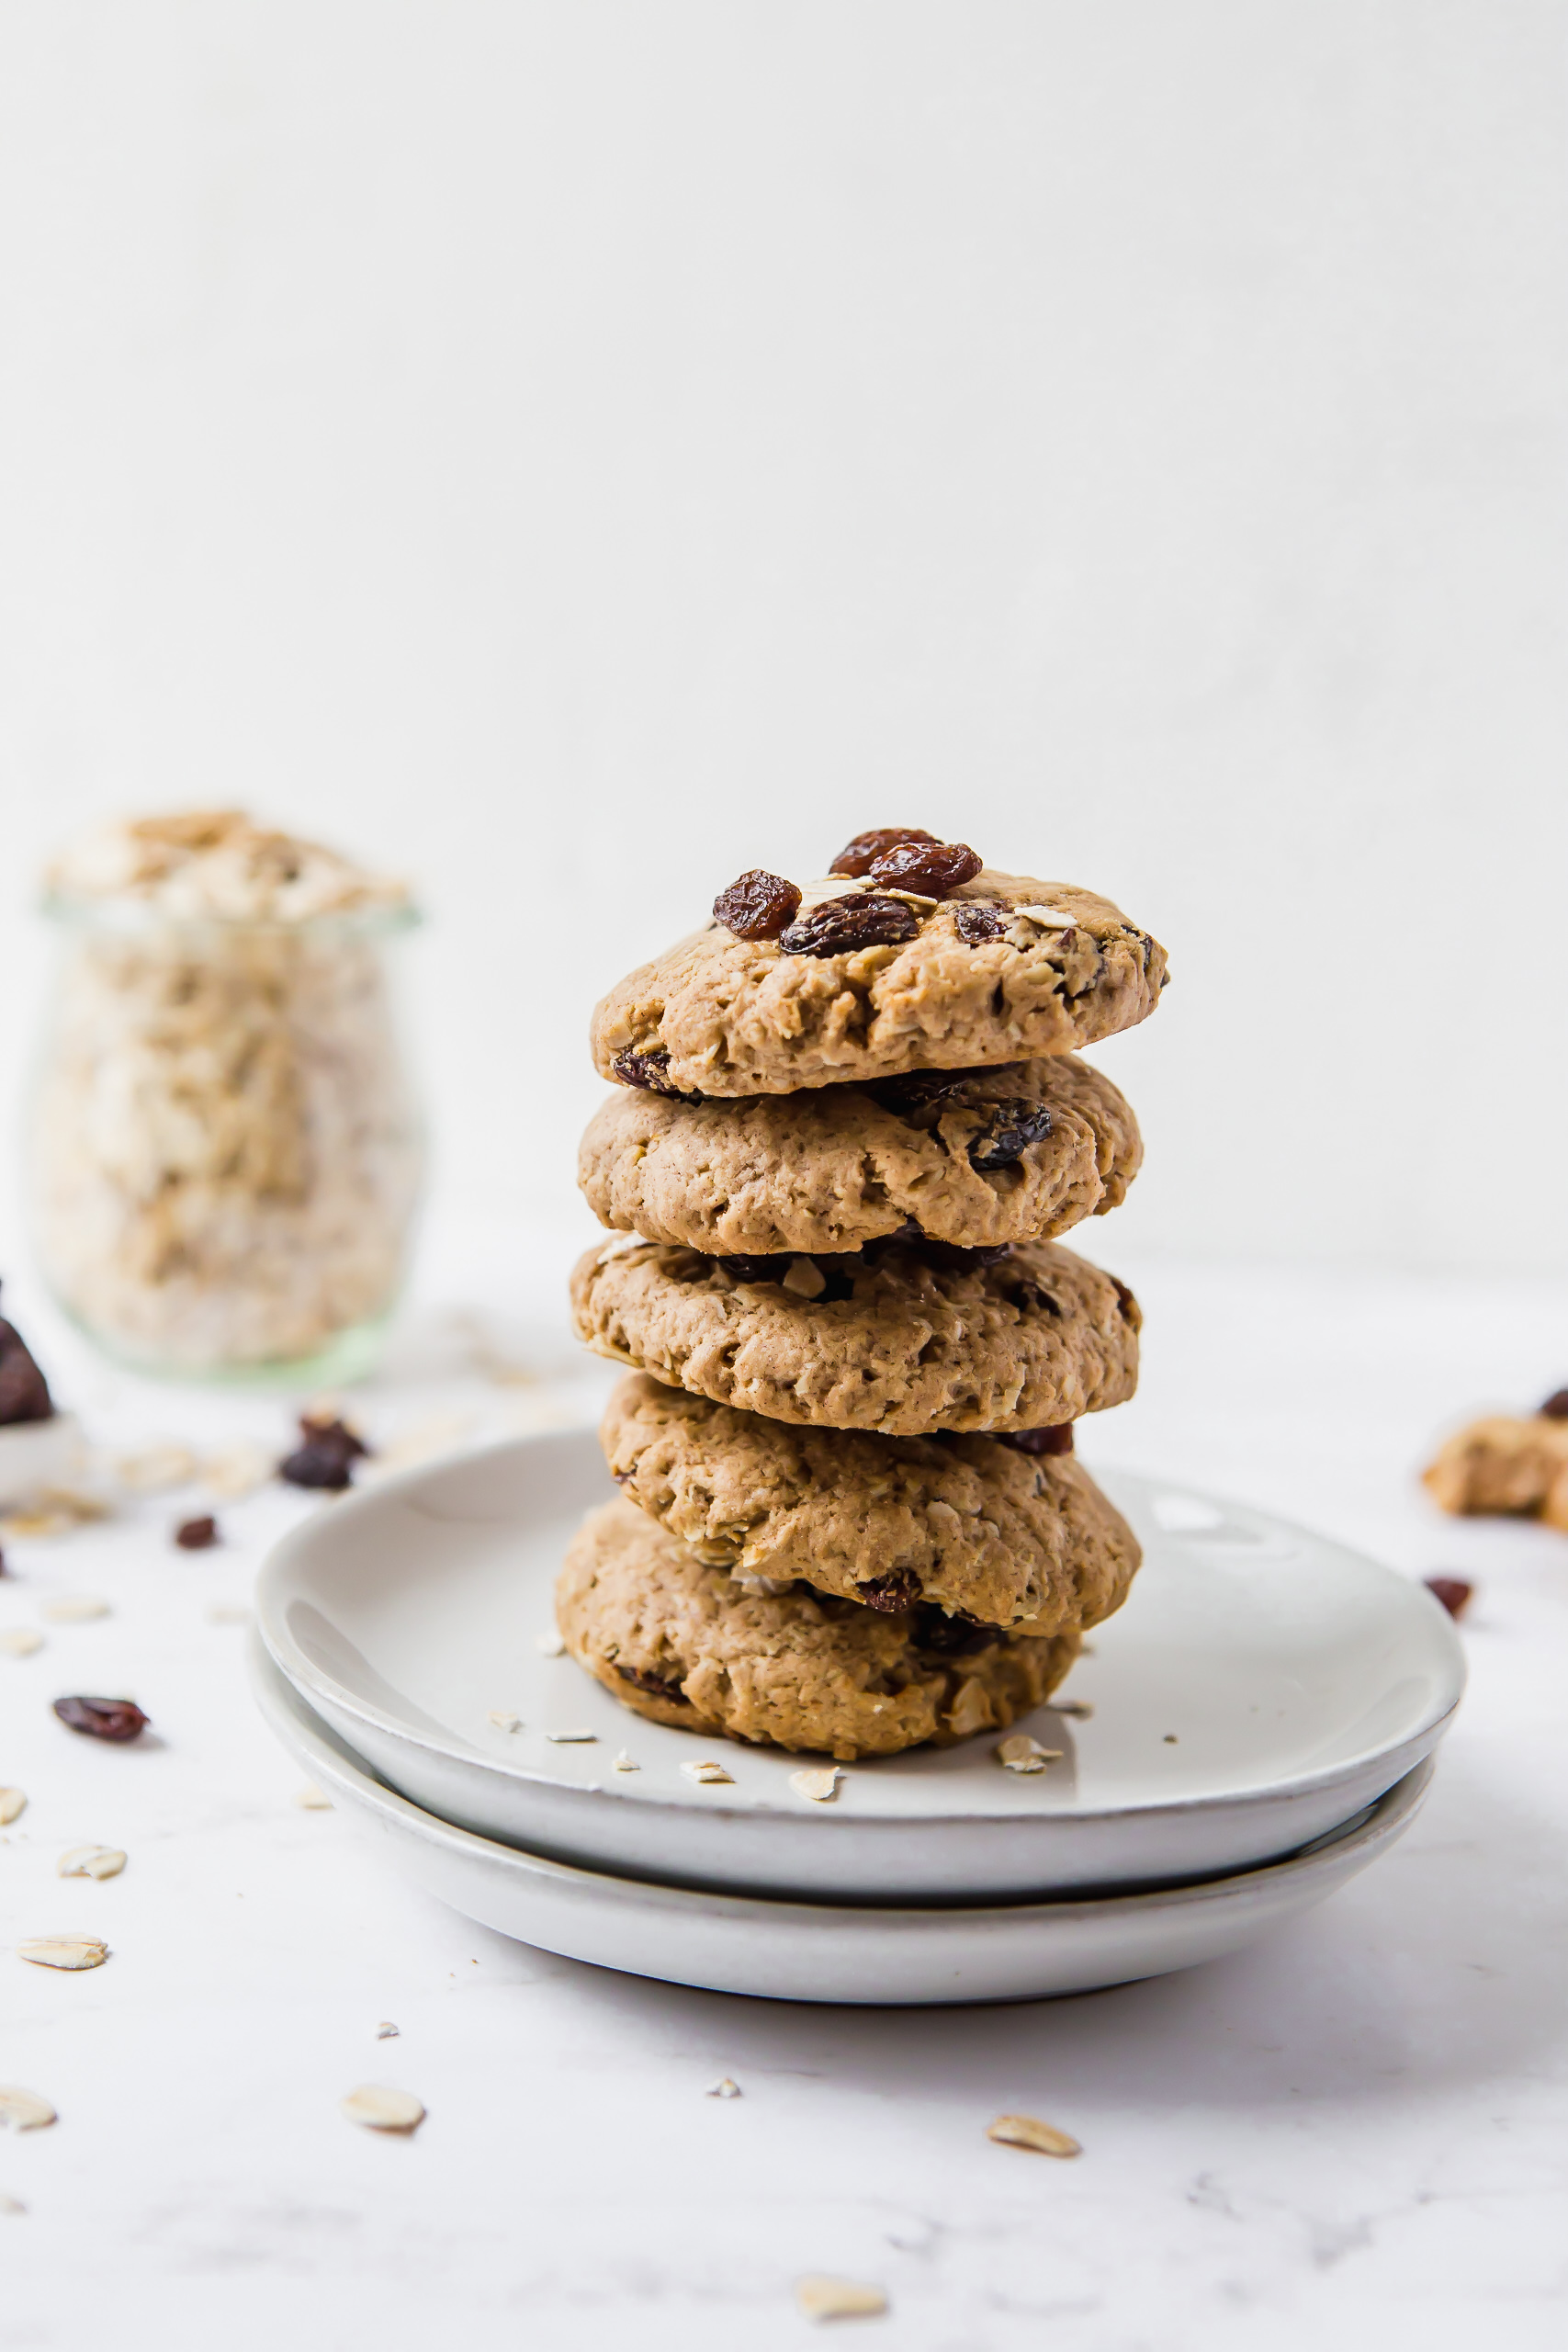 Five oatmeal raisin cookies stacked on top of each other then places on two small plates. There is a small jar of raw oats in the background on the left.